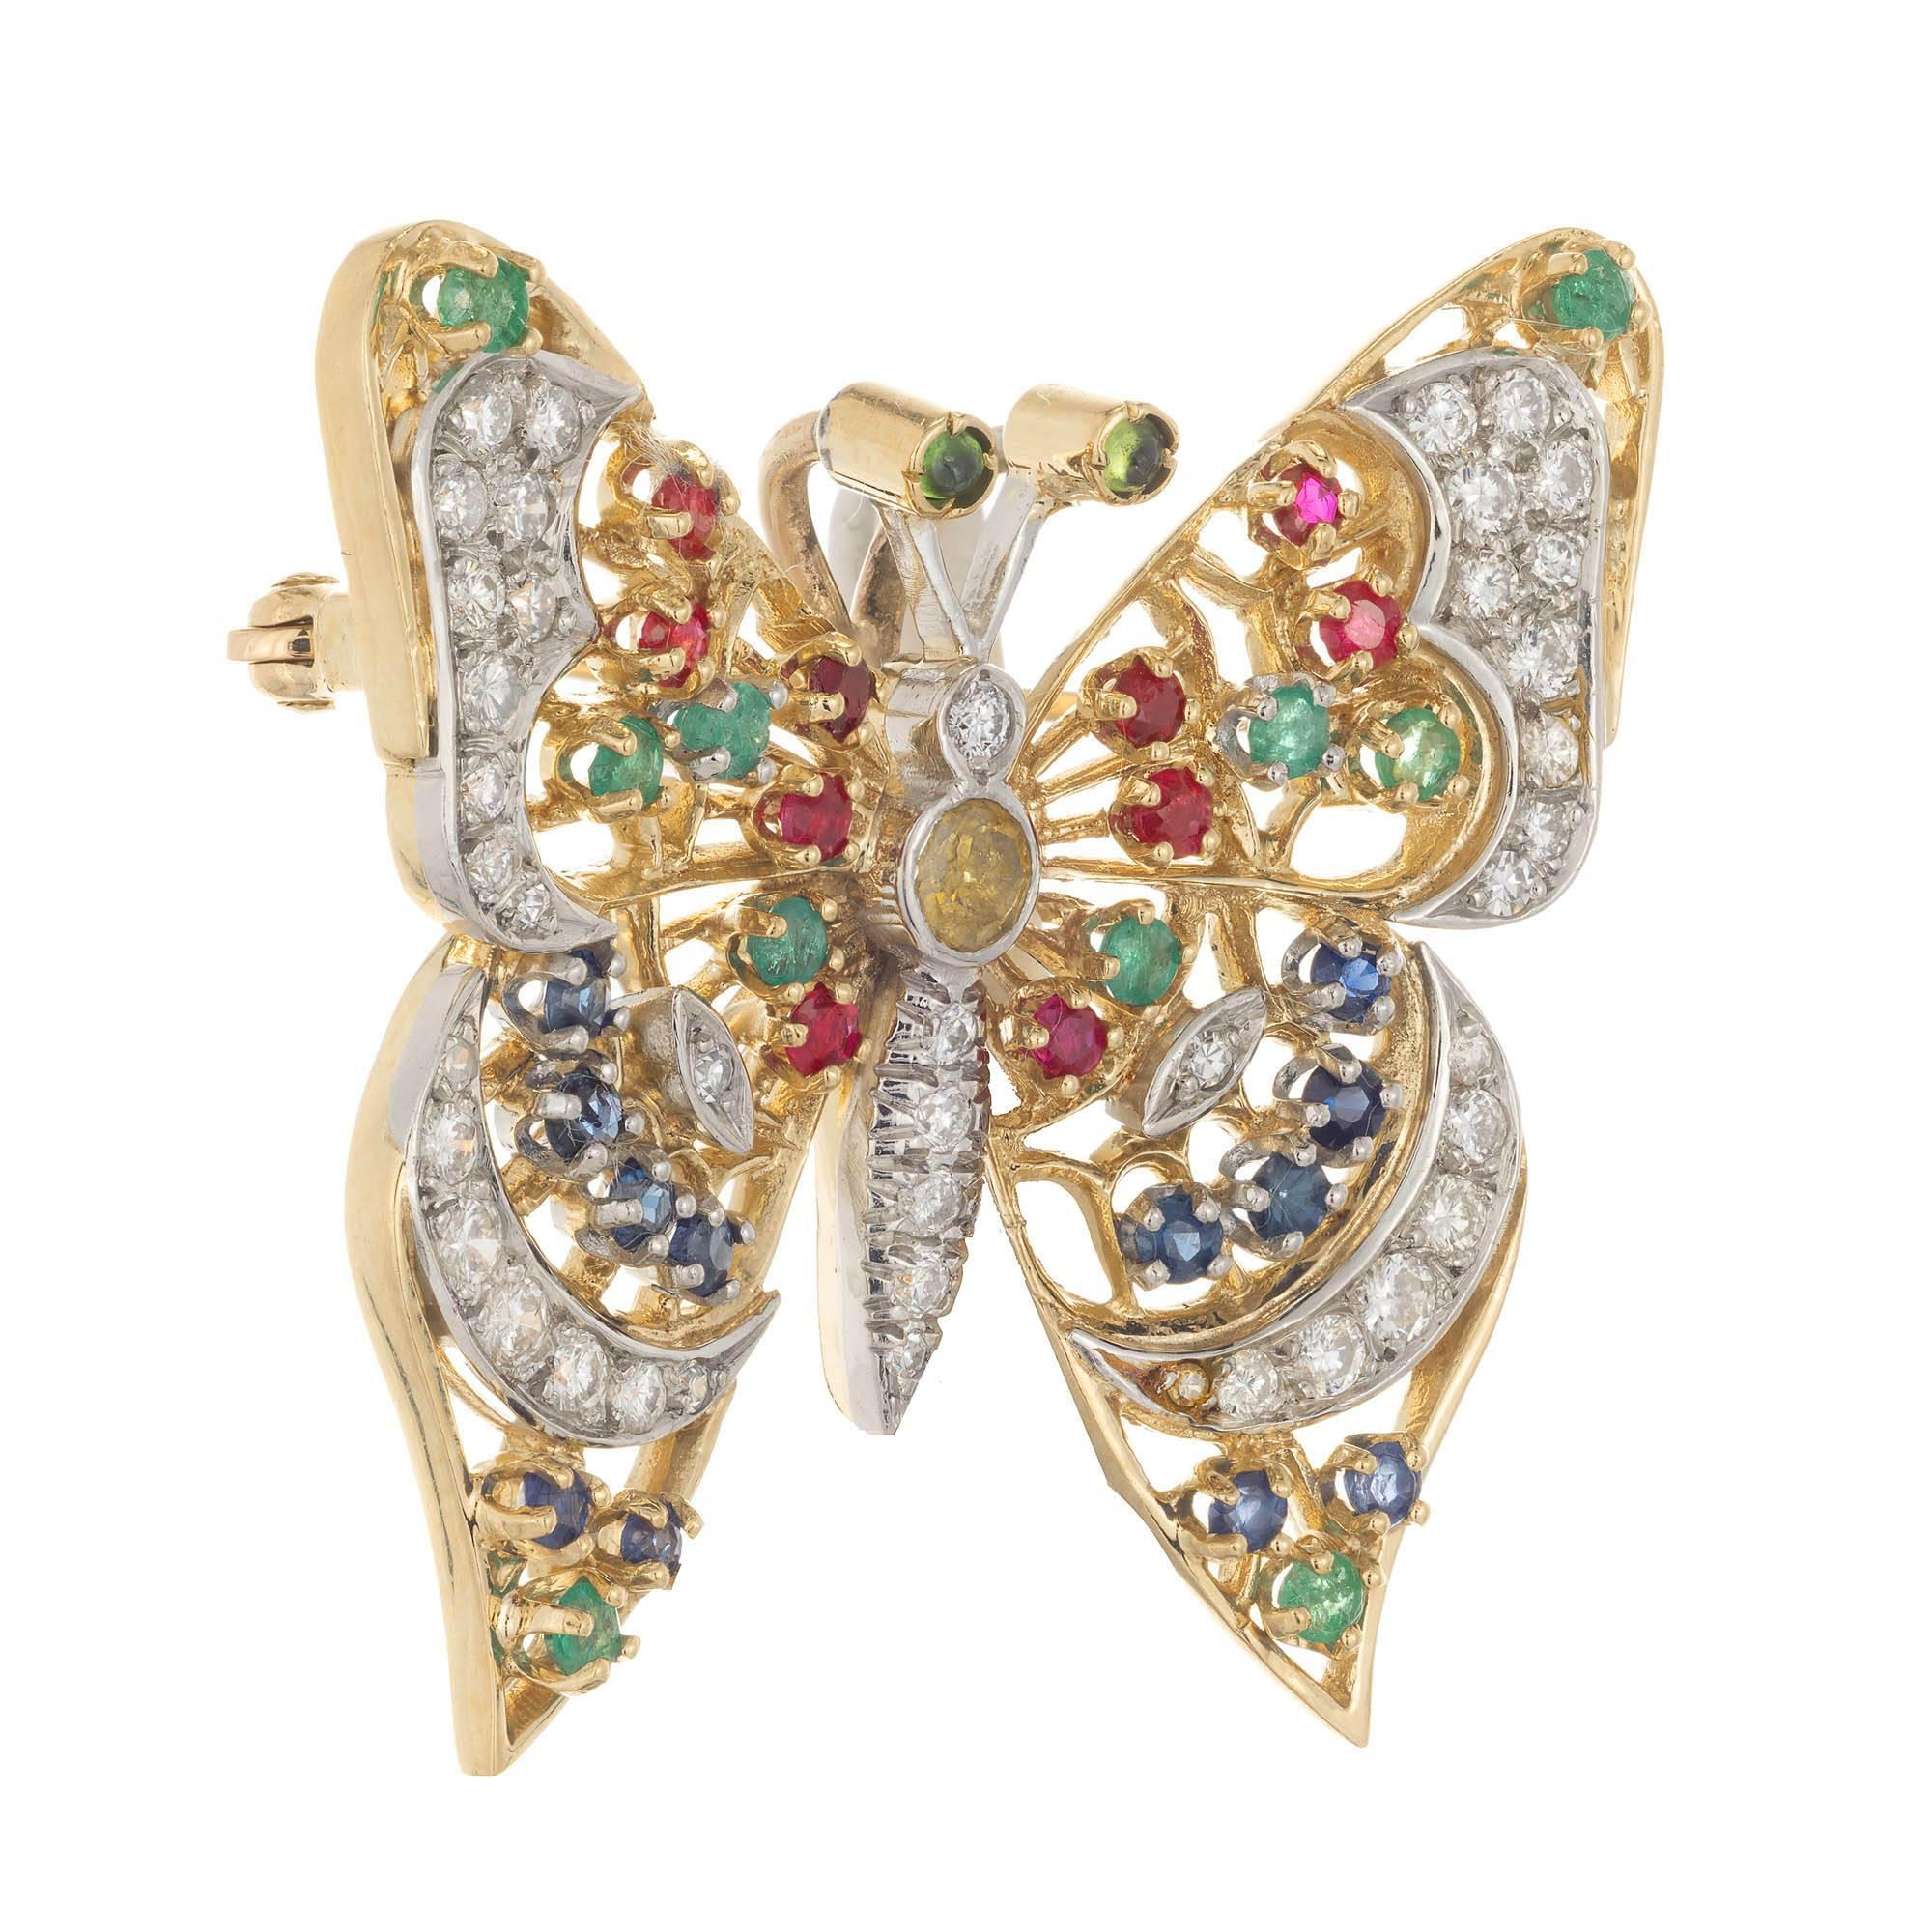 Yellow gold diamond and colored stone set butterfly brooch. Decorative butterfly has white pave set diamonds in each wing and down the center part of body.  Emeralds, rubies and sapphires are prong set in each wing with peridot cabochon bezel set in